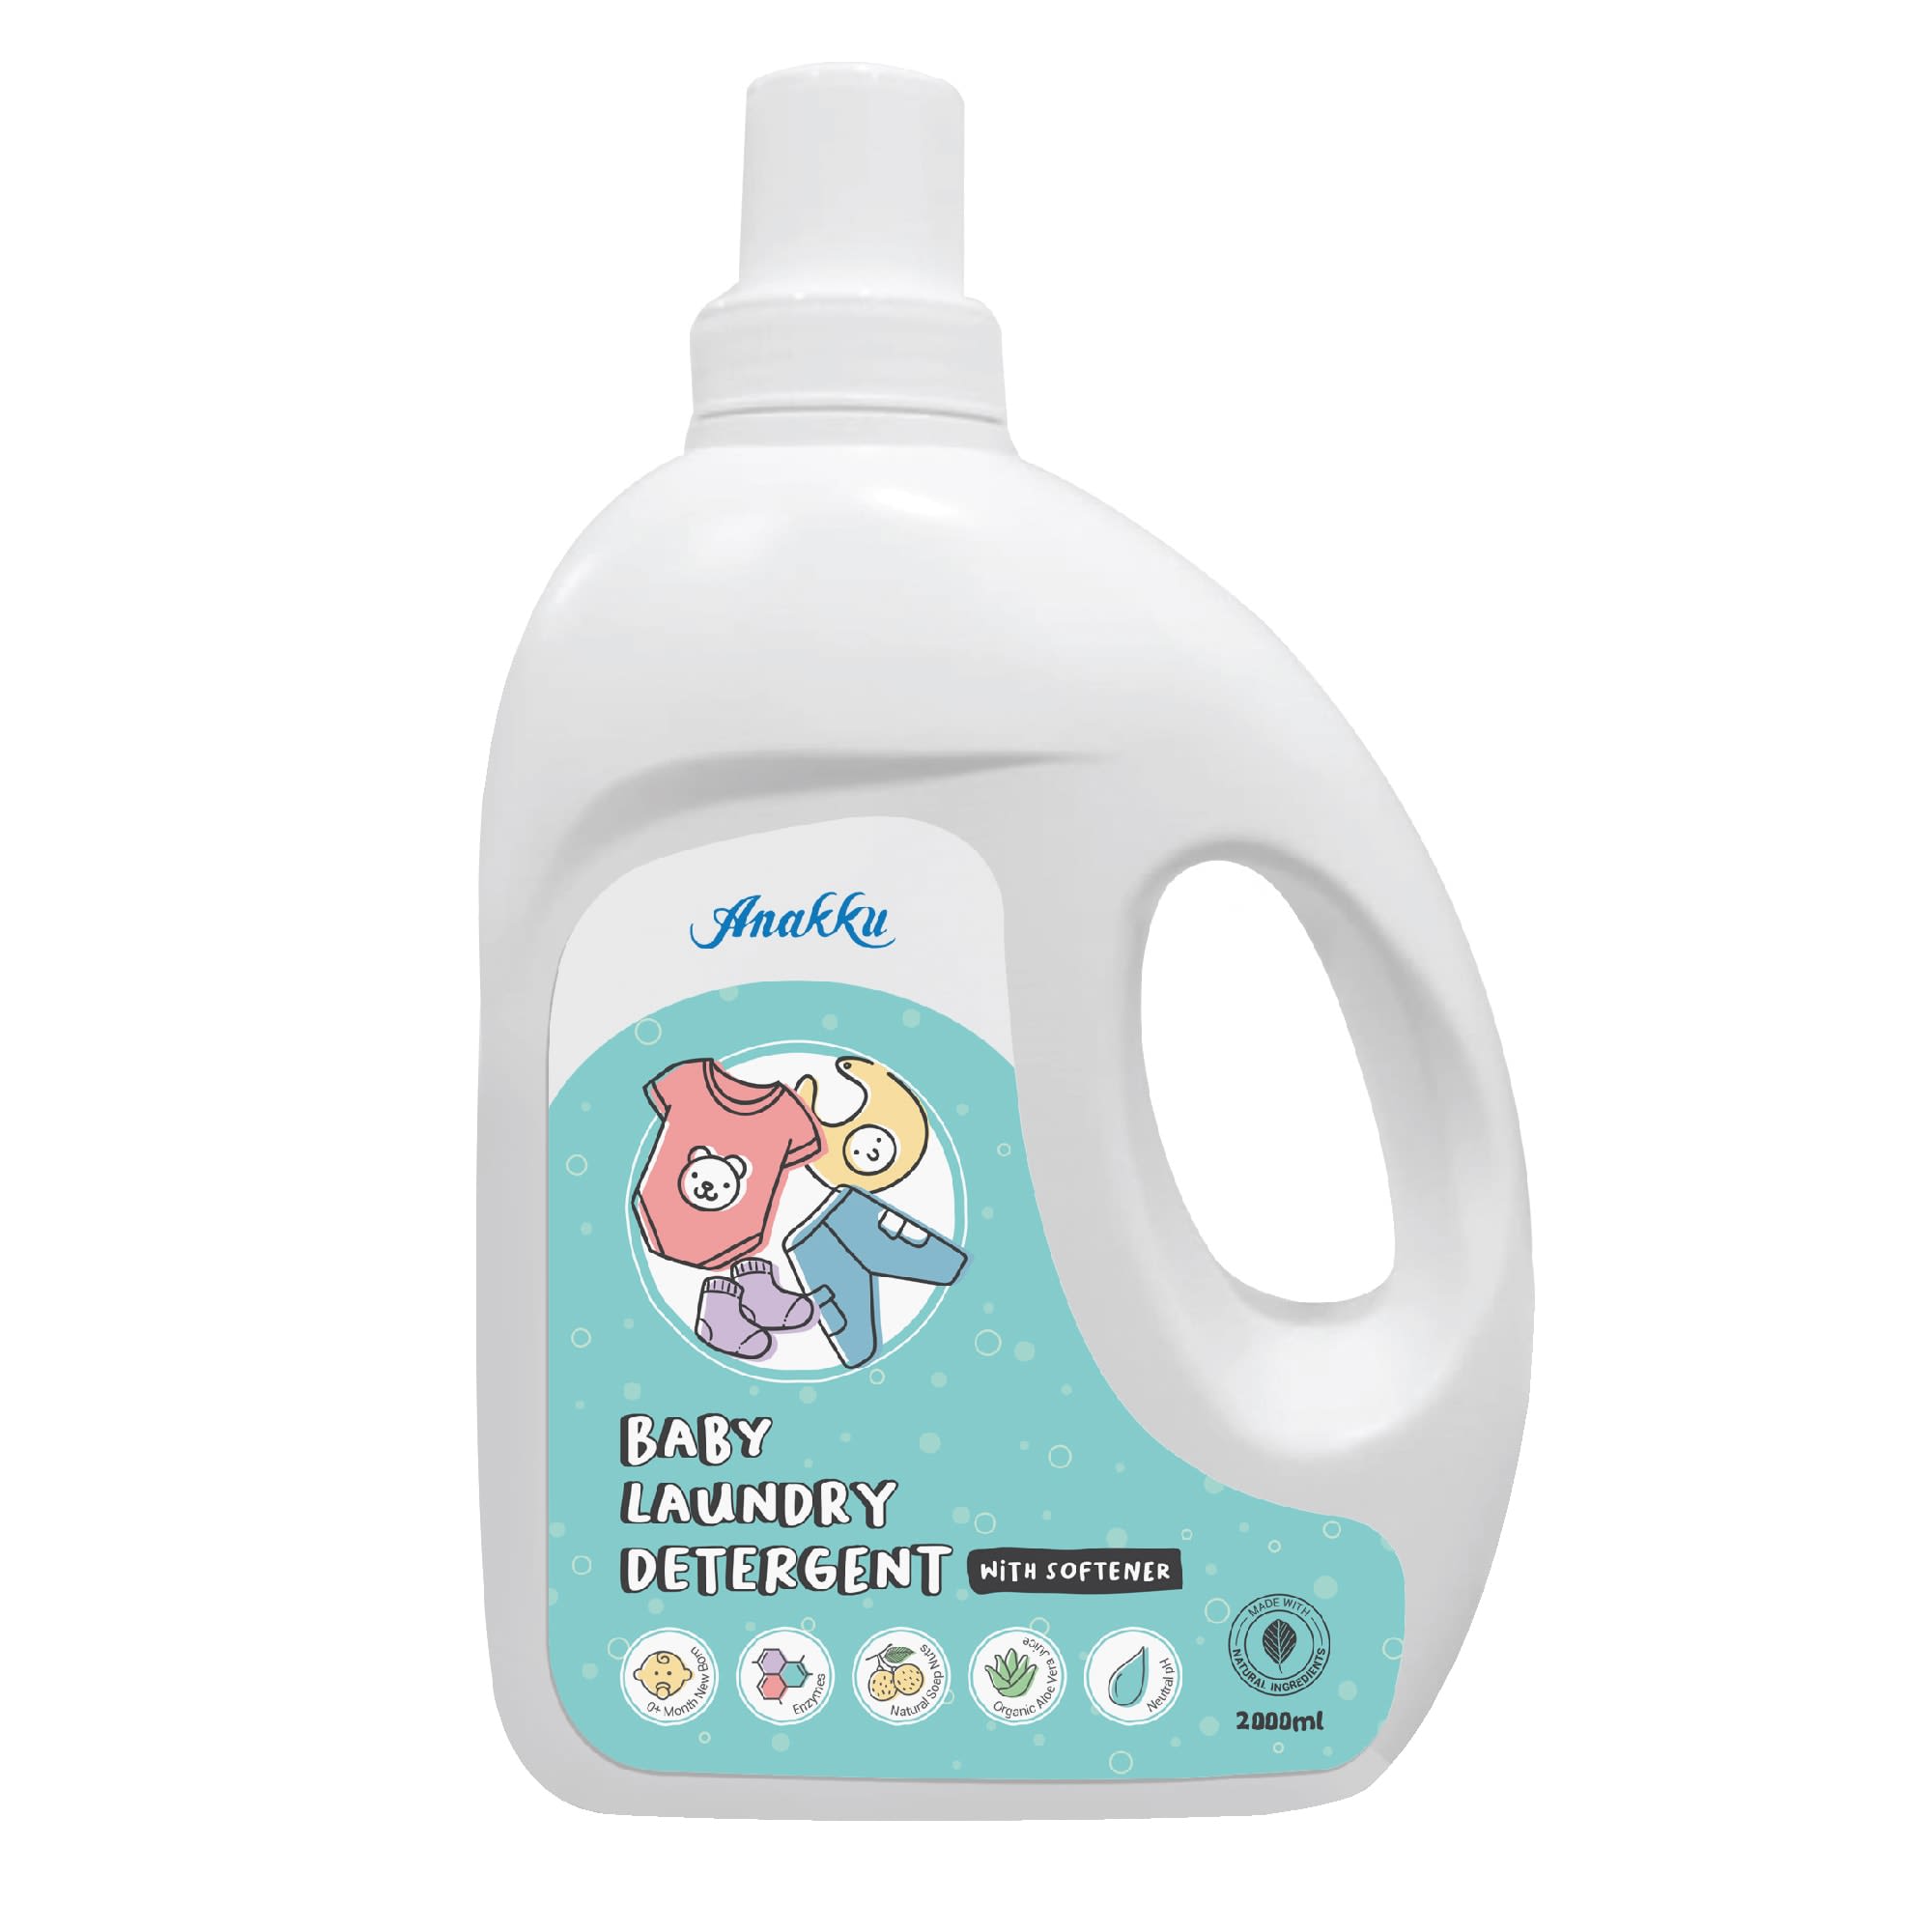 7 Best Baby Detergents in Malaysia 2020